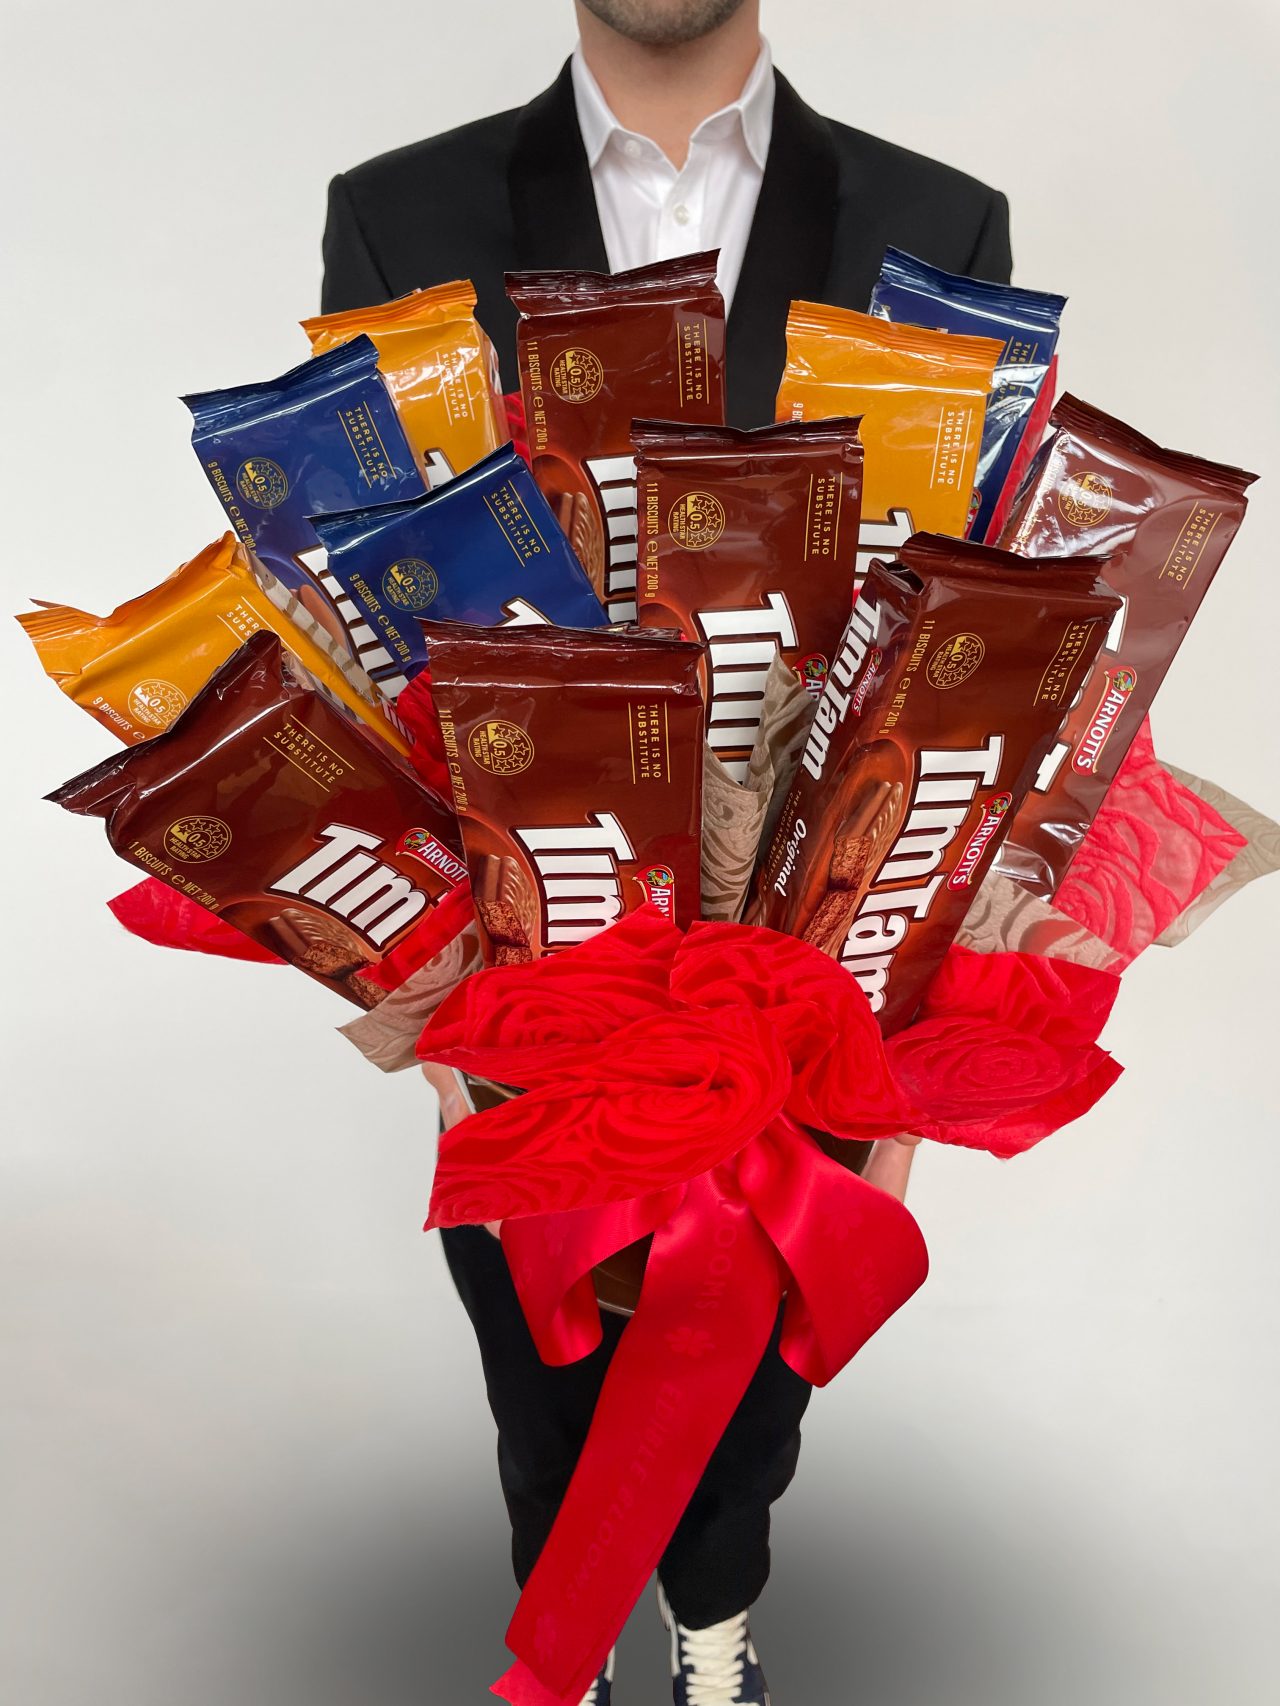 Tim Tam bouquets are a thing in NZ now so flowers can get fkd thanks